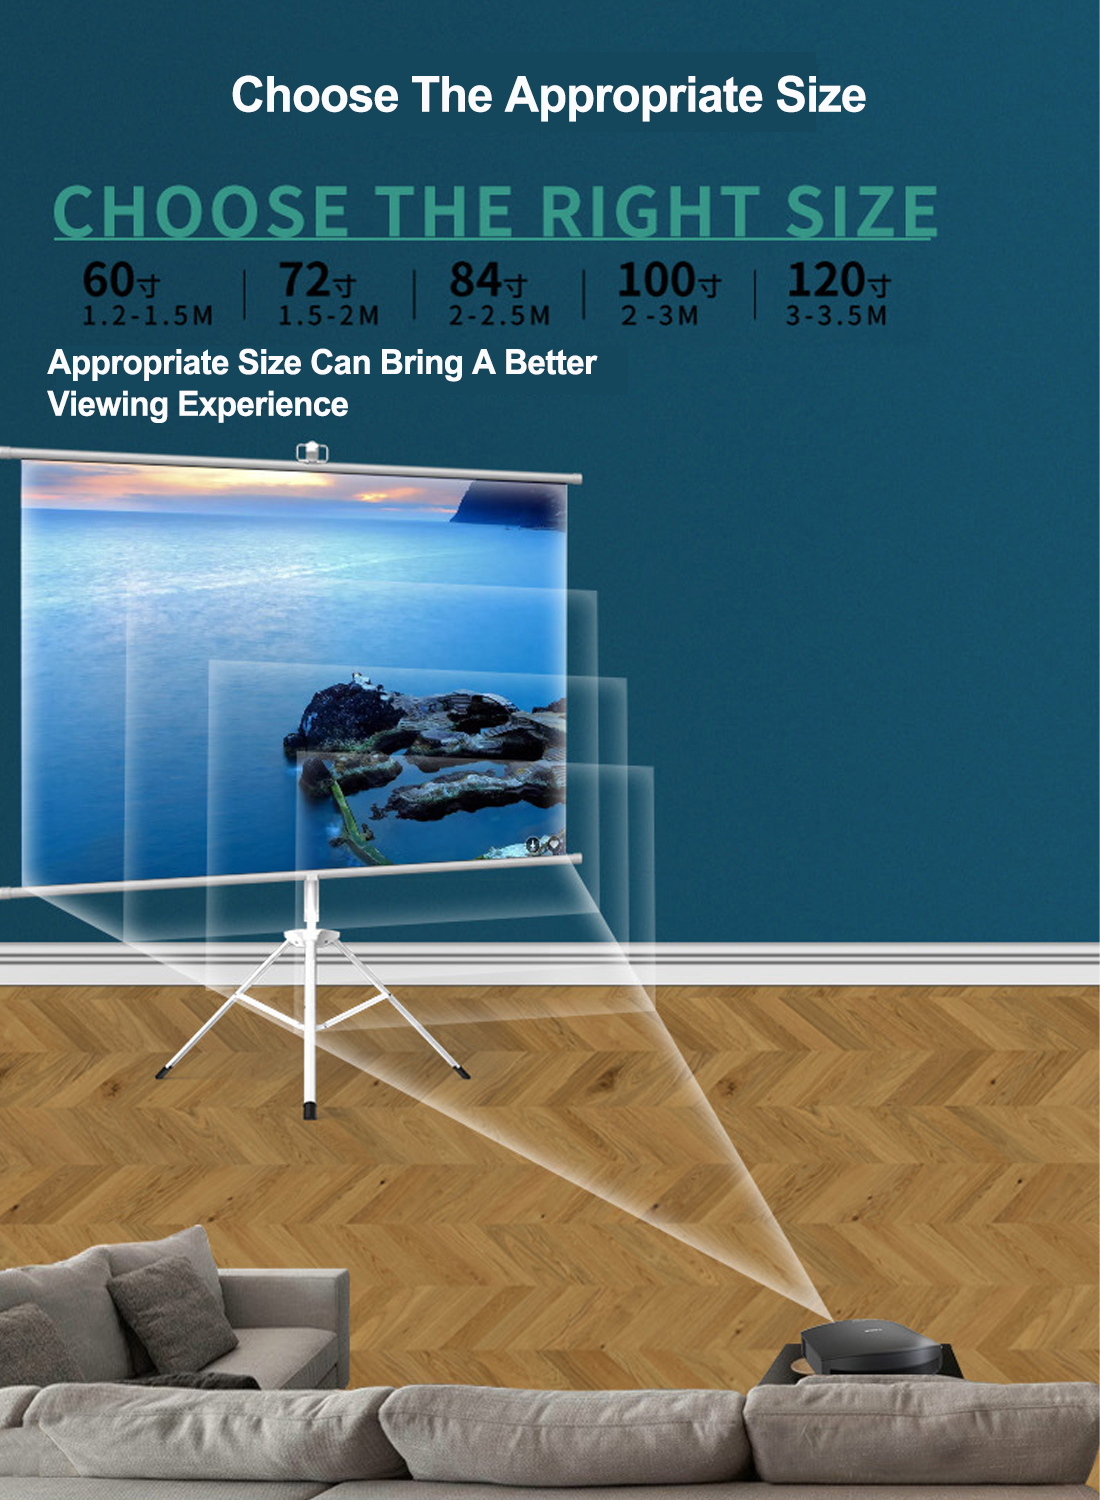 72 inch 16:9 Portable Projector Screen, White Fiberglass Material, 2-in-1 Wall Mount &amp; Tripod Stand ET72W-169 for Outdoor and Indoor